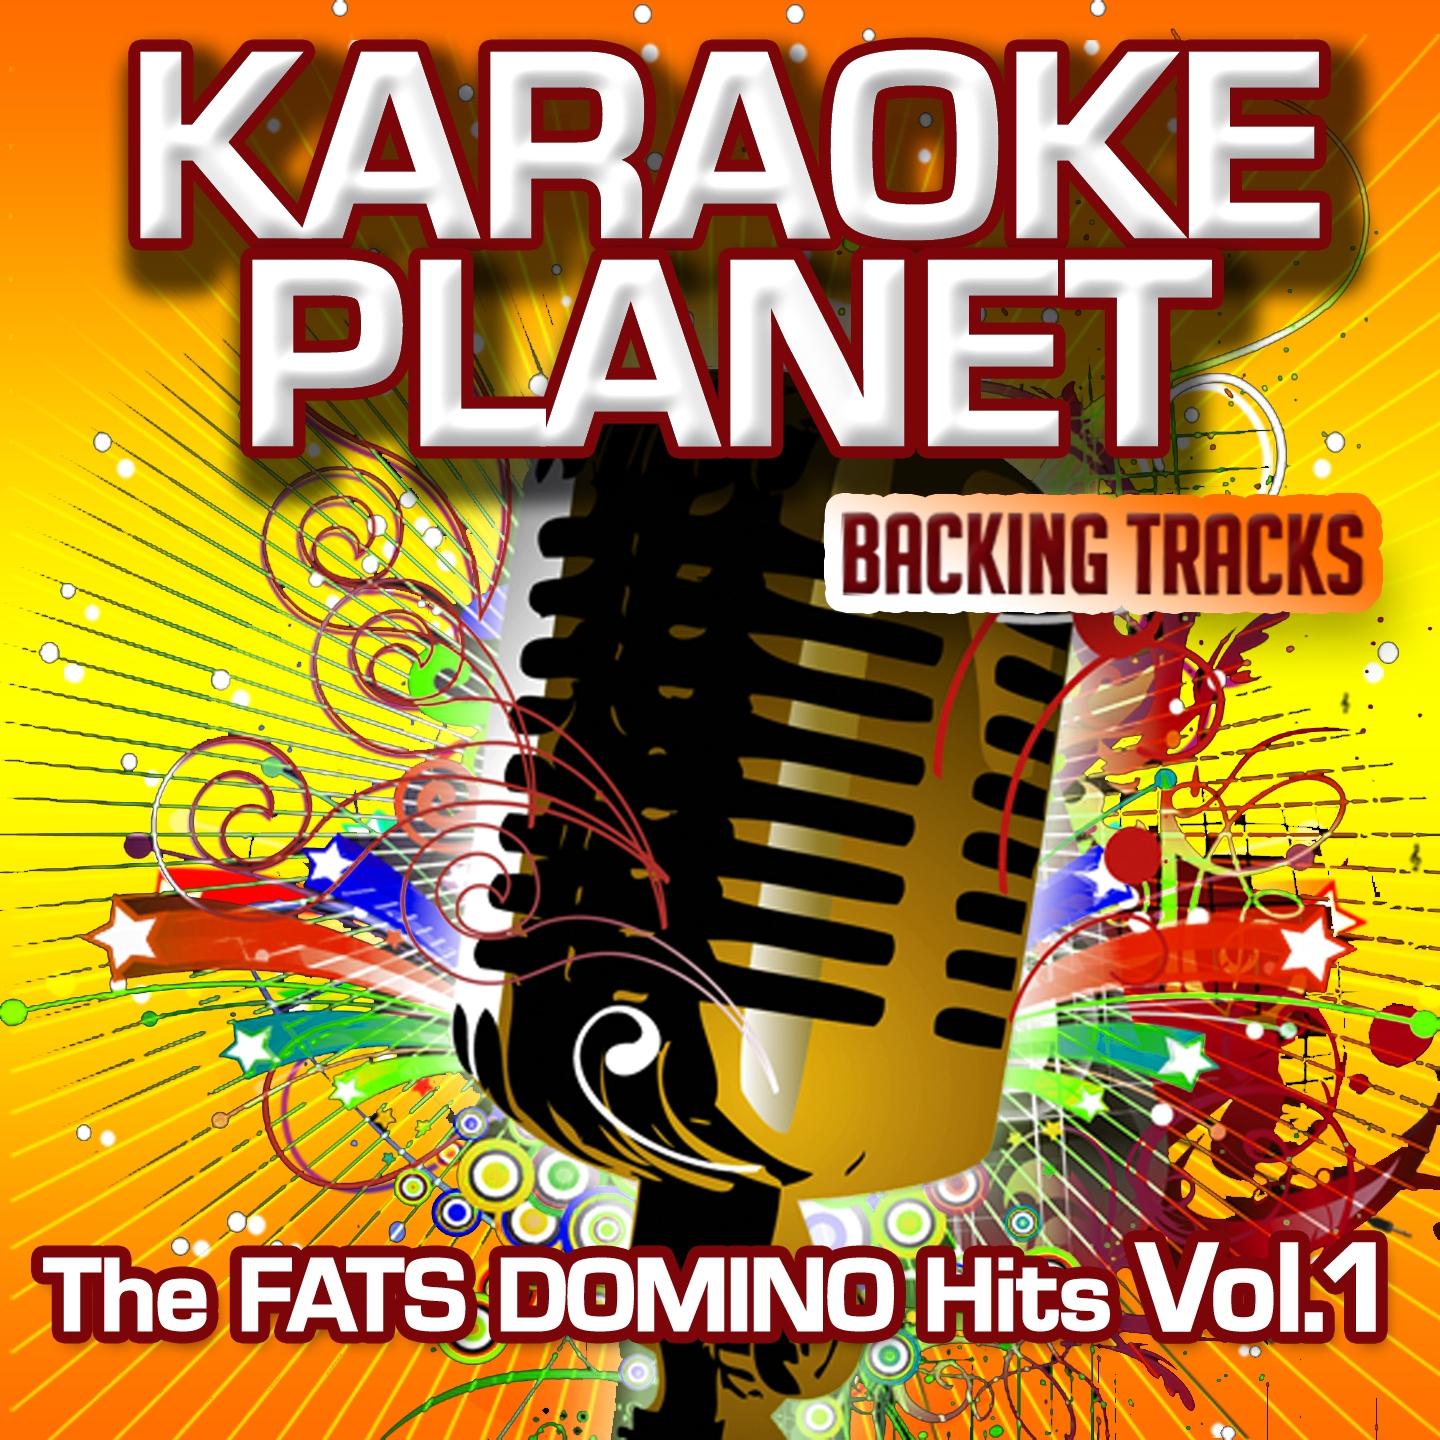 Blue Monday (Karaoke Version In the Art of Fats Domino)